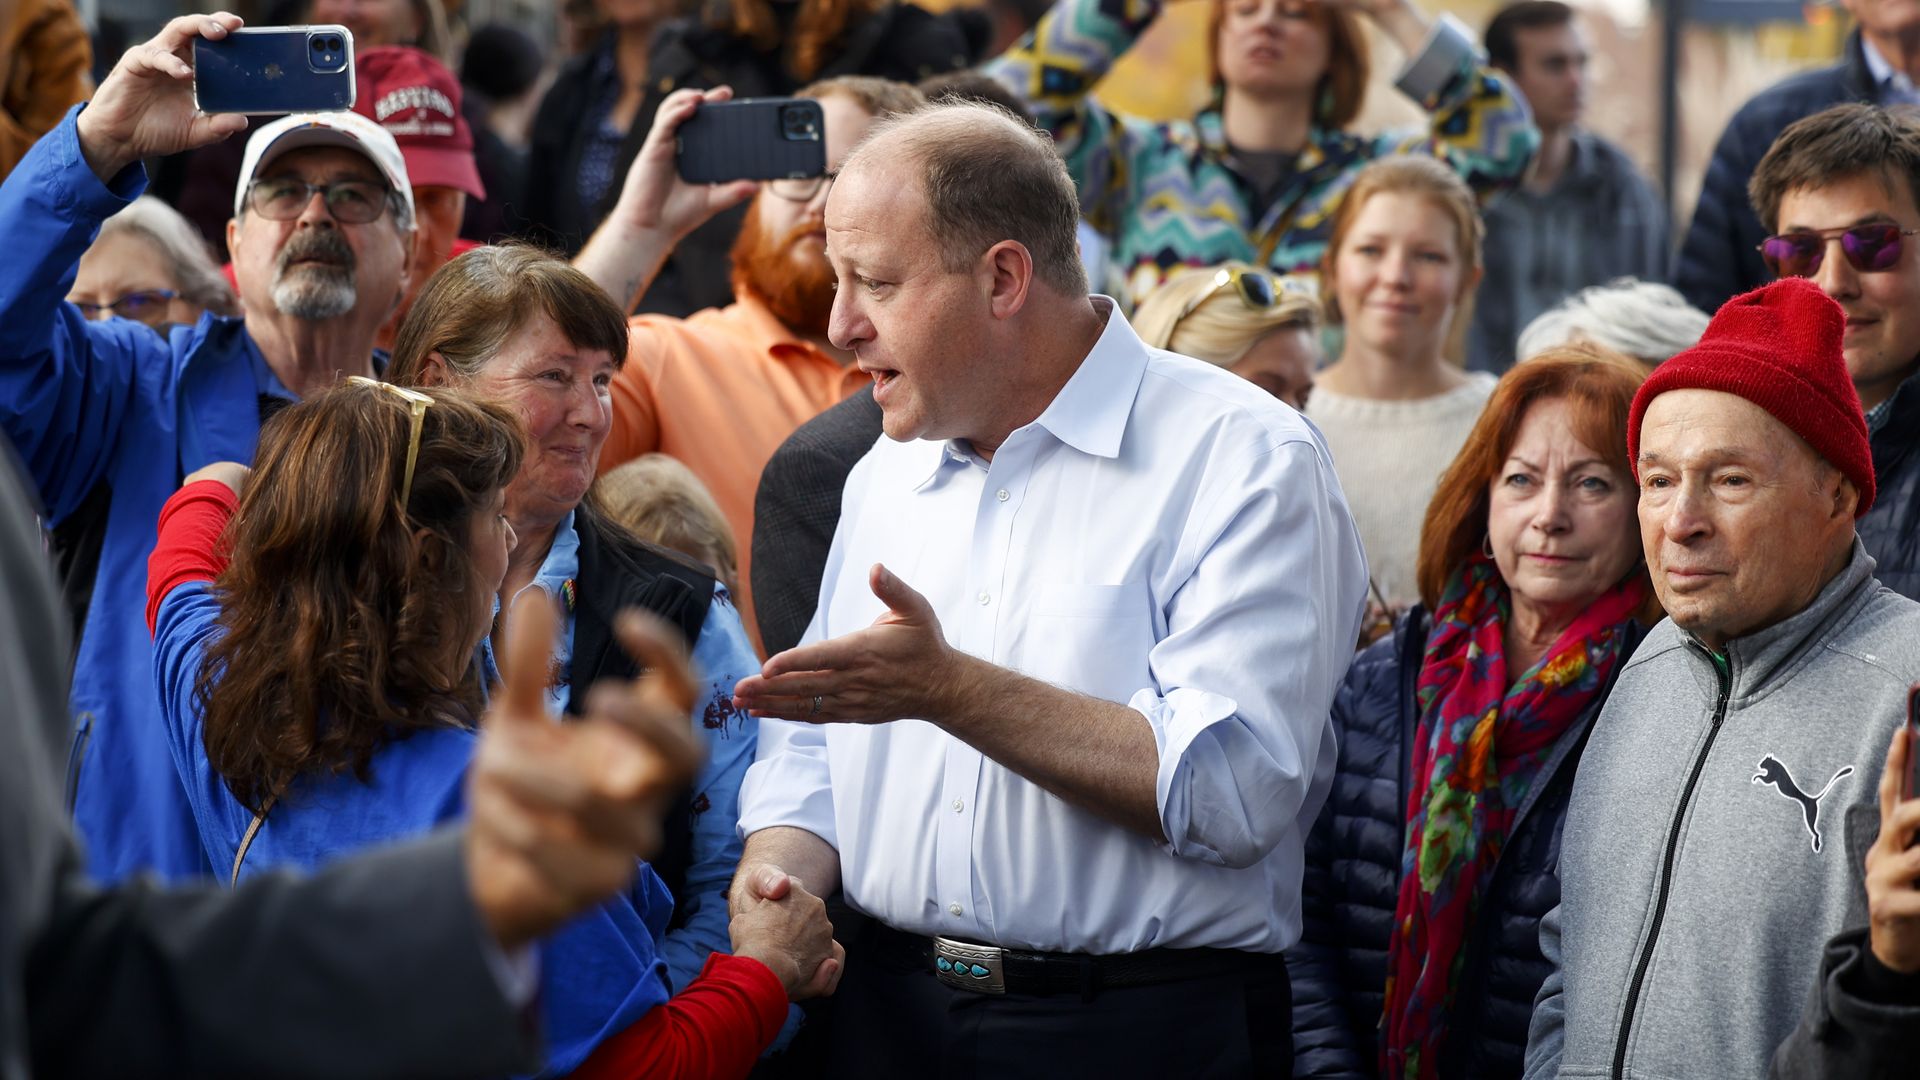 Gov. Jared Polis speaks to a supporter at an Oct. 26 rally in Golden, Colorado. Photo: Michael Ciaglo/Getty Images